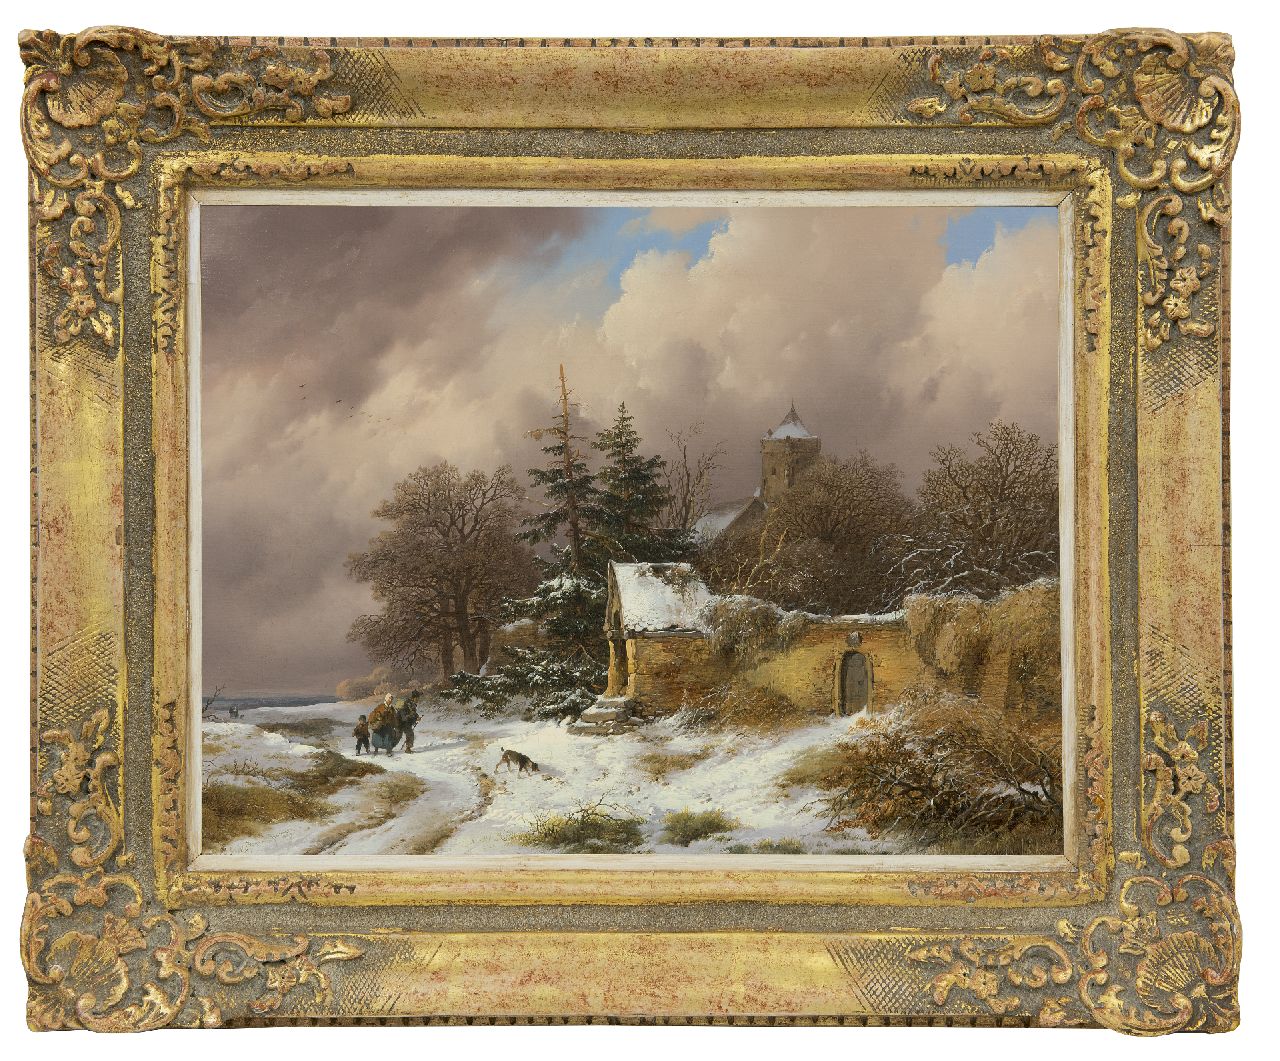 Haanen R.A.  | Remigius Adrianus Haanen | Paintings offered for sale | A winter landscape with land folk on a path, oil on canvas 36.3 x 49.3 cm, signed l.l. and dated 1849